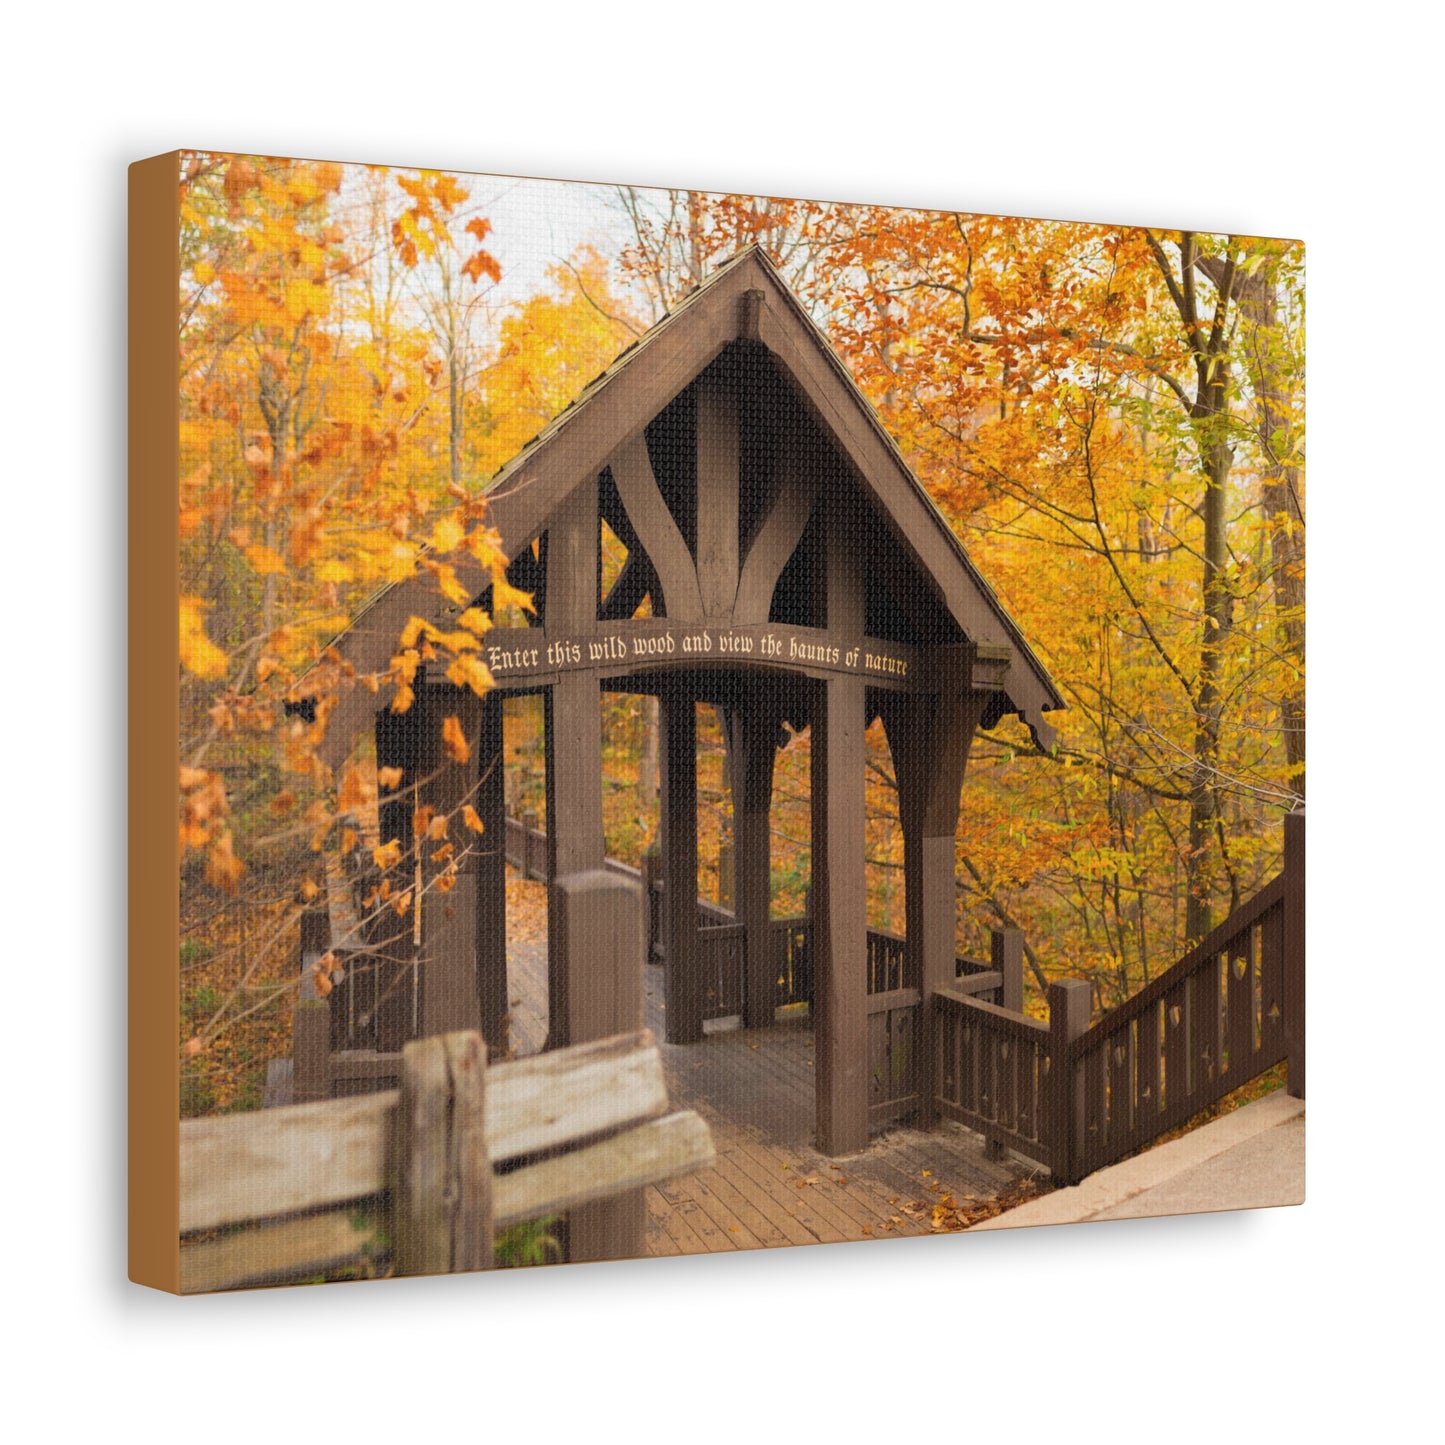 7 Bridges Trail’s Covered Bridge at Grant Park in South Milwaukee Wisconsin, Photography Canvas Wrap Wall Art